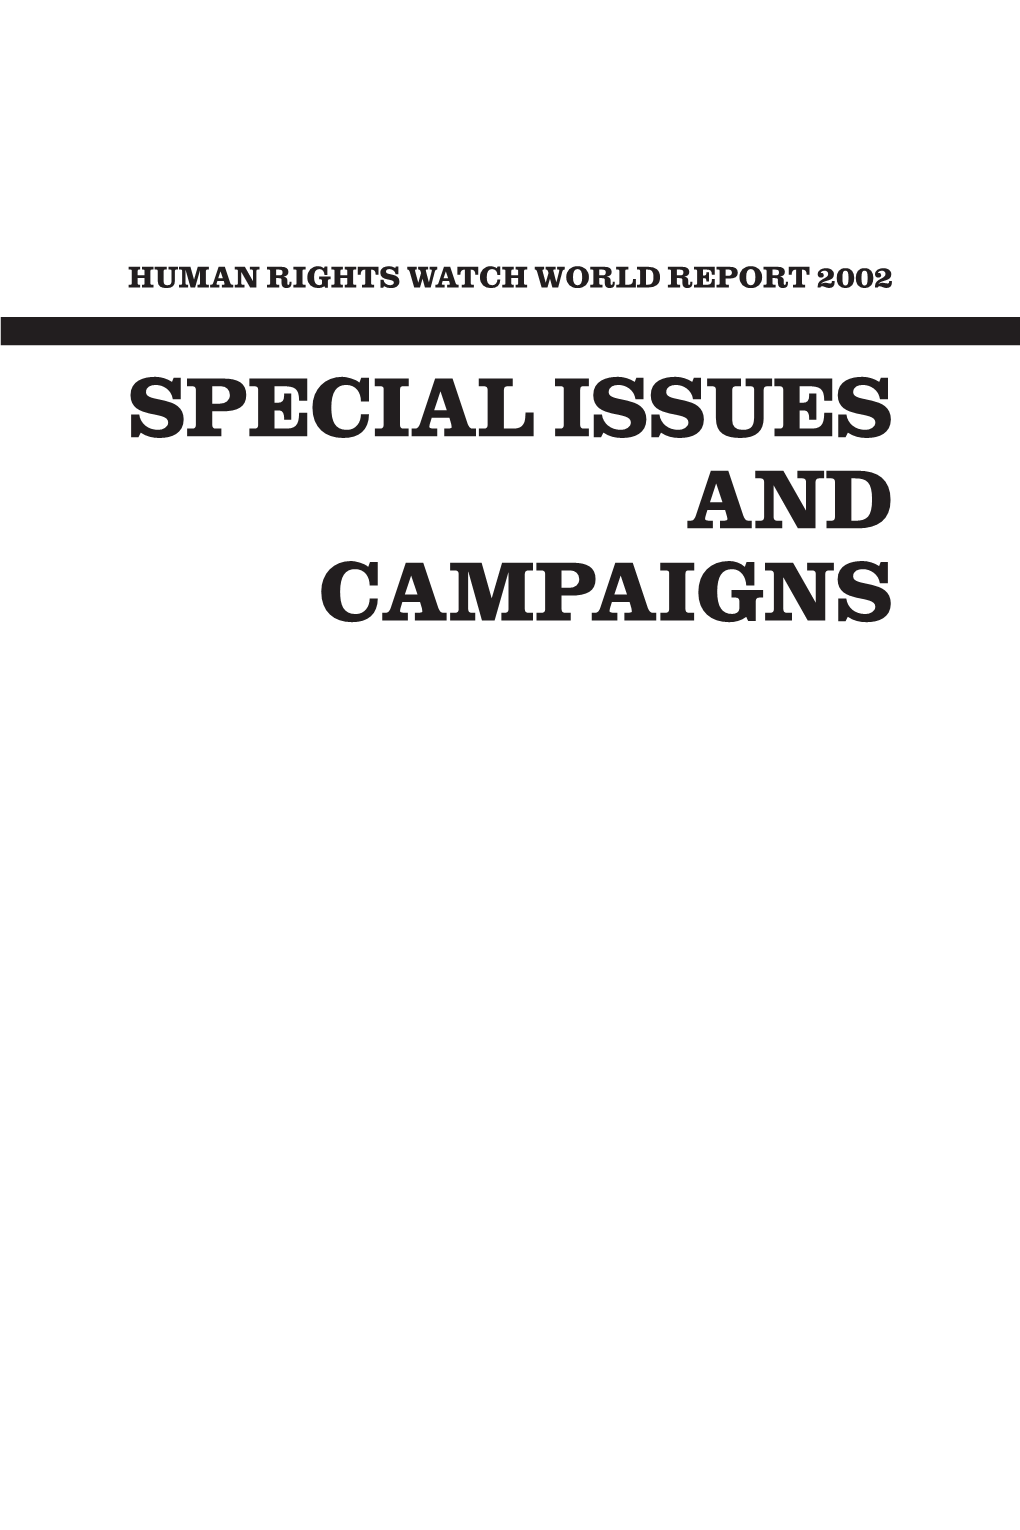 SPECIAL ISSUES and CAMPAIGNS Internally Displaced Family in Sierra Leone